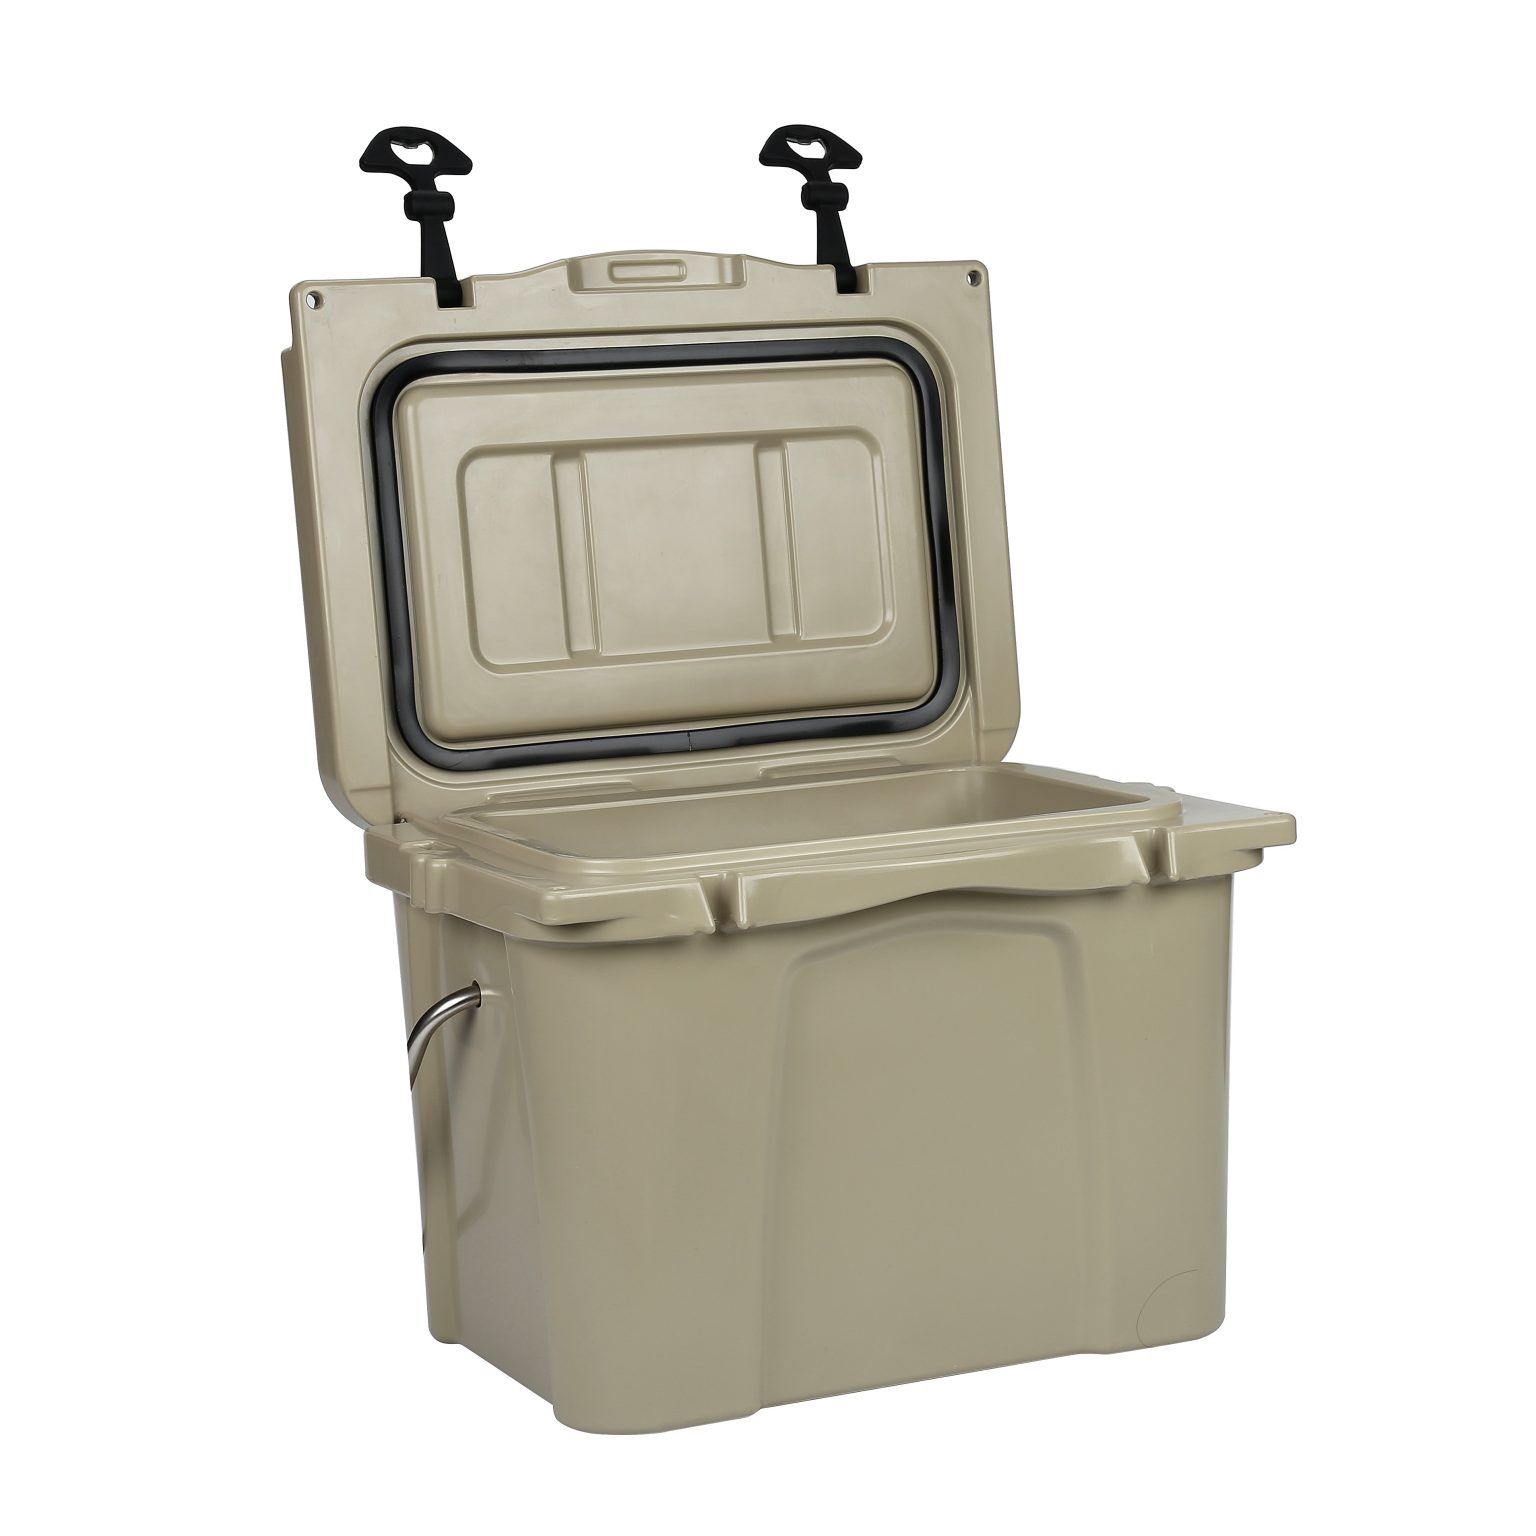 Insulated Cooler 3 1536x1536 